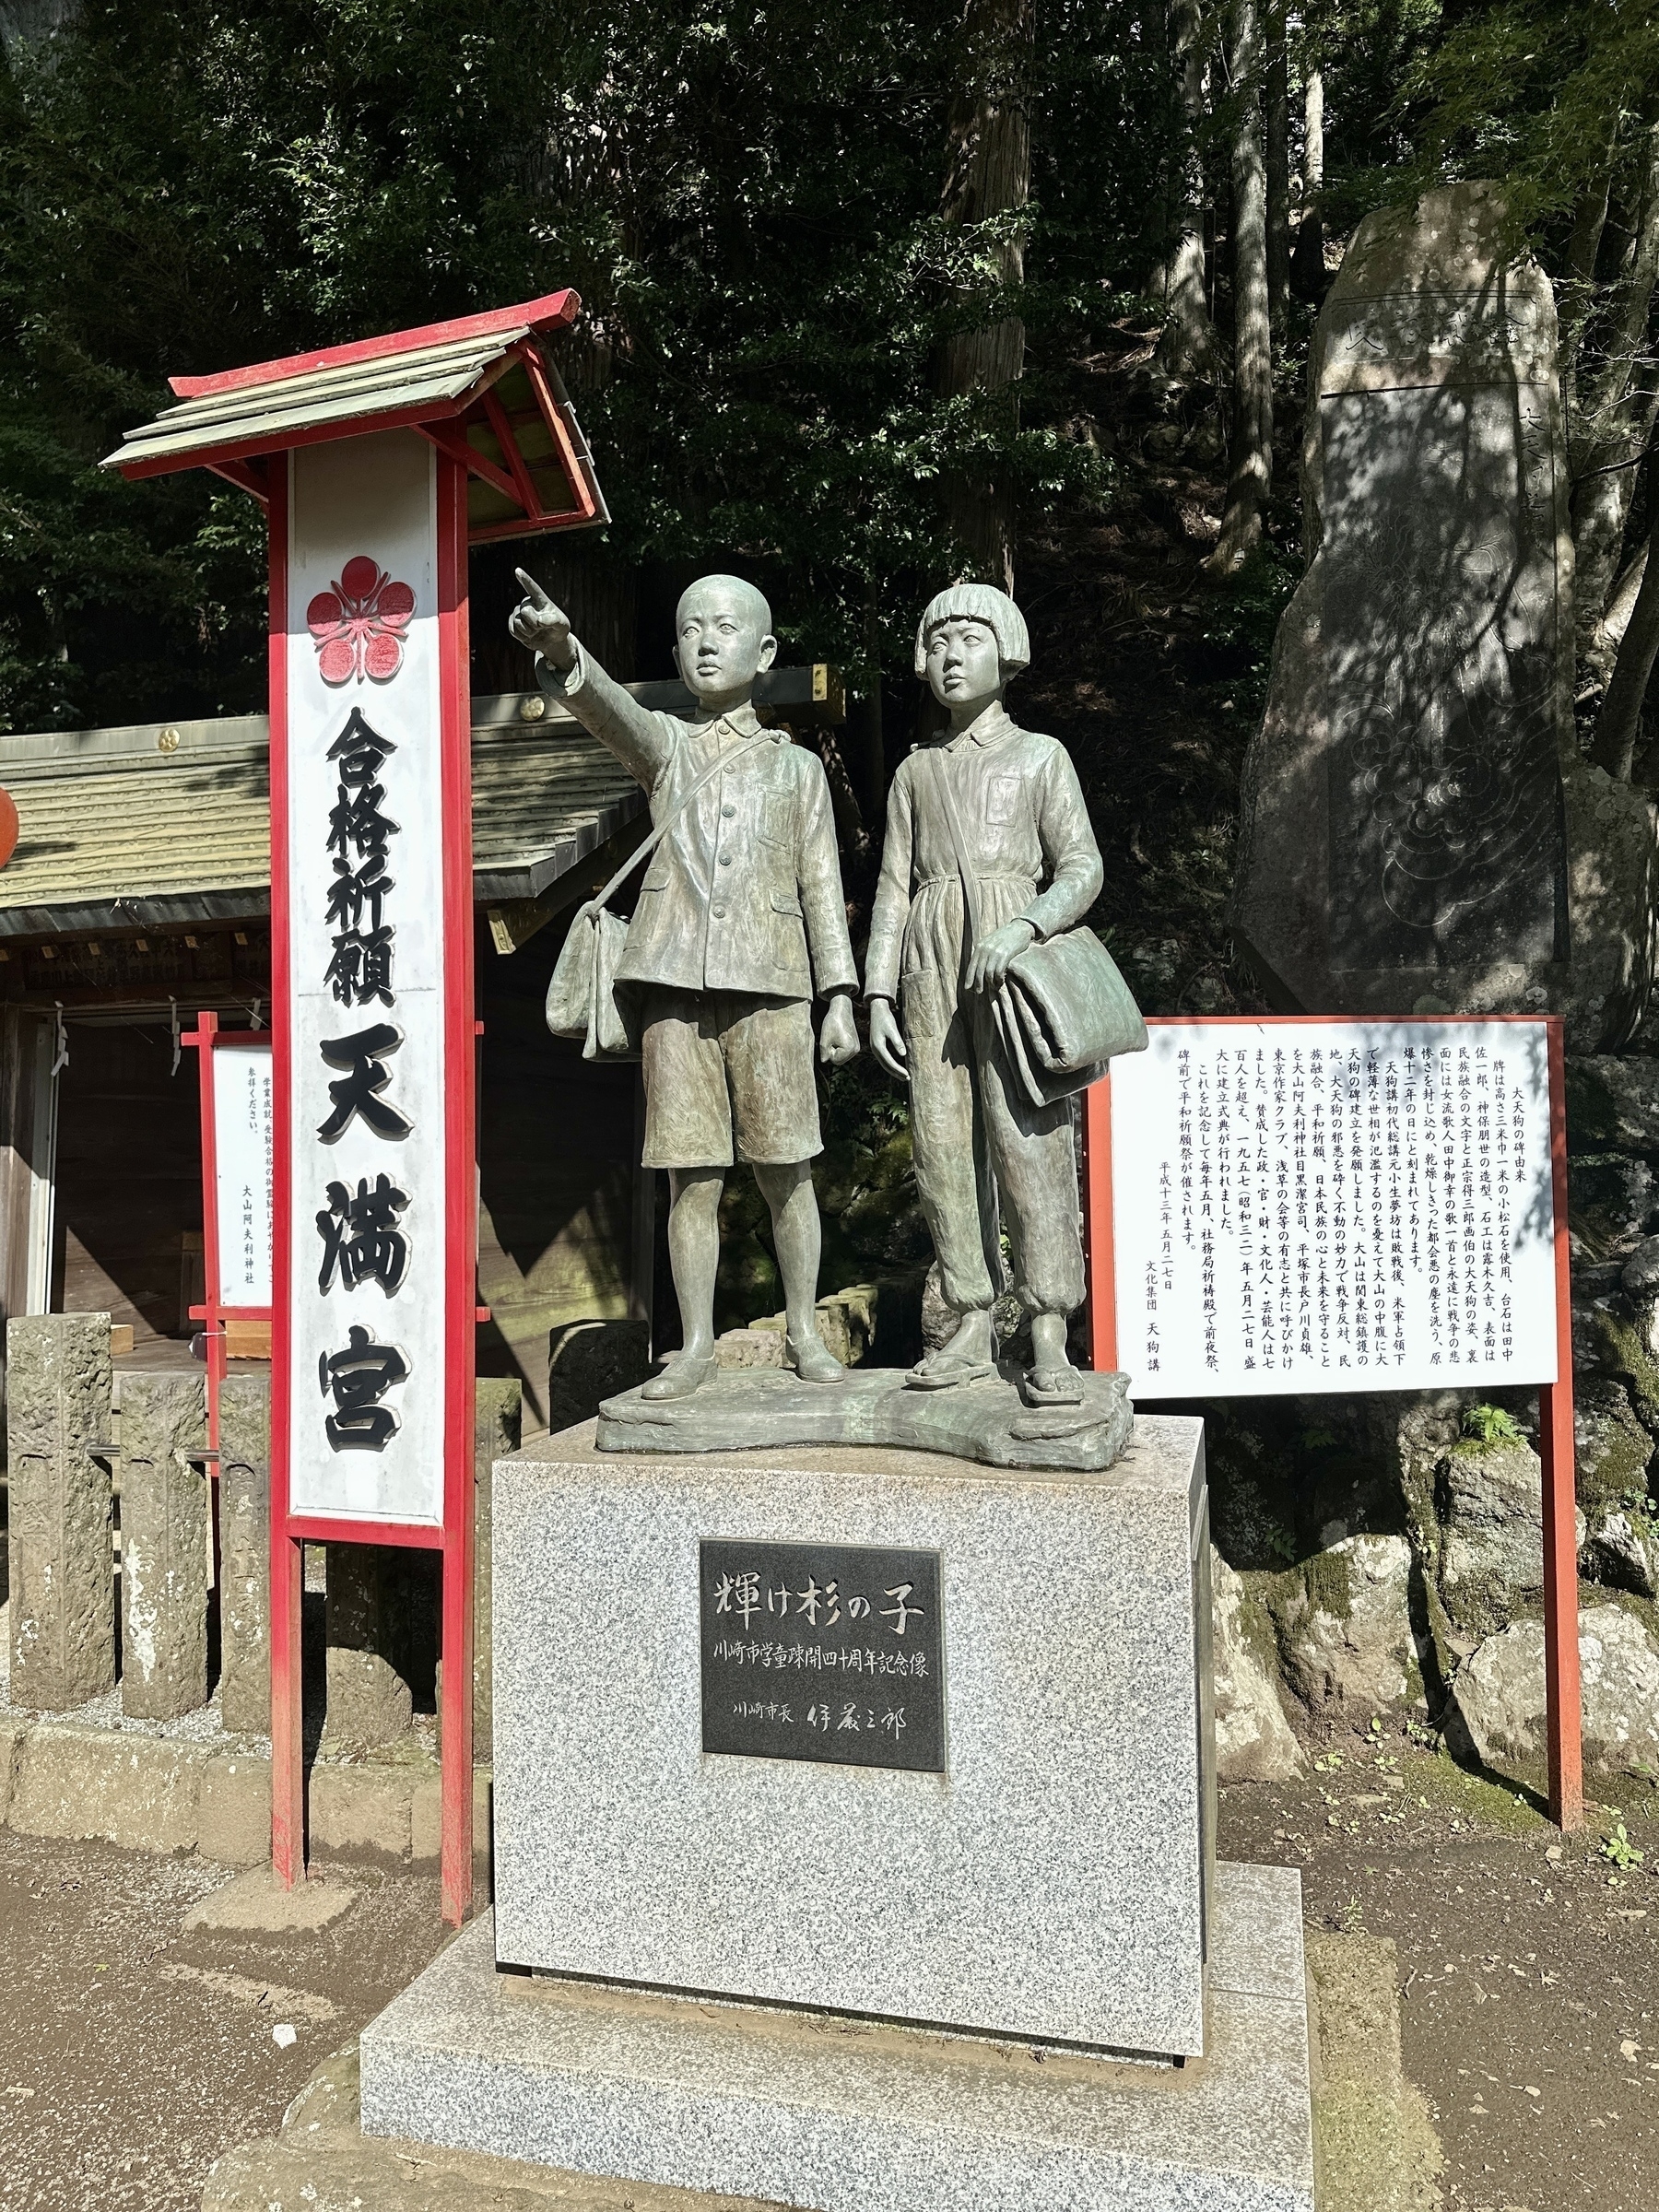 Statue on Mt Oyama commemorating 40 years after the end of the WWII evacuation for kids